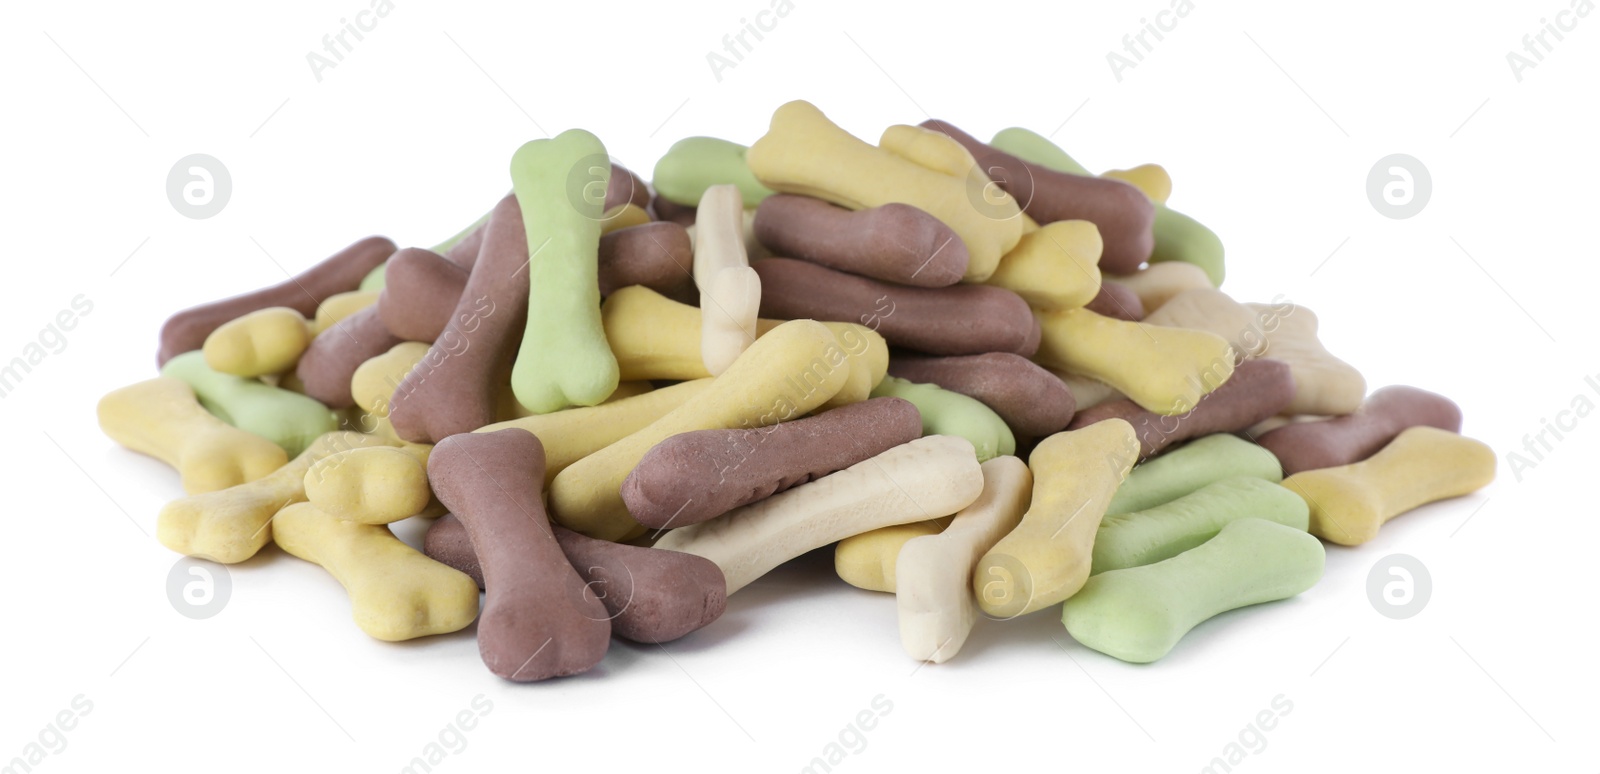 Photo of Pile of different bone shaped dog cookies on white background